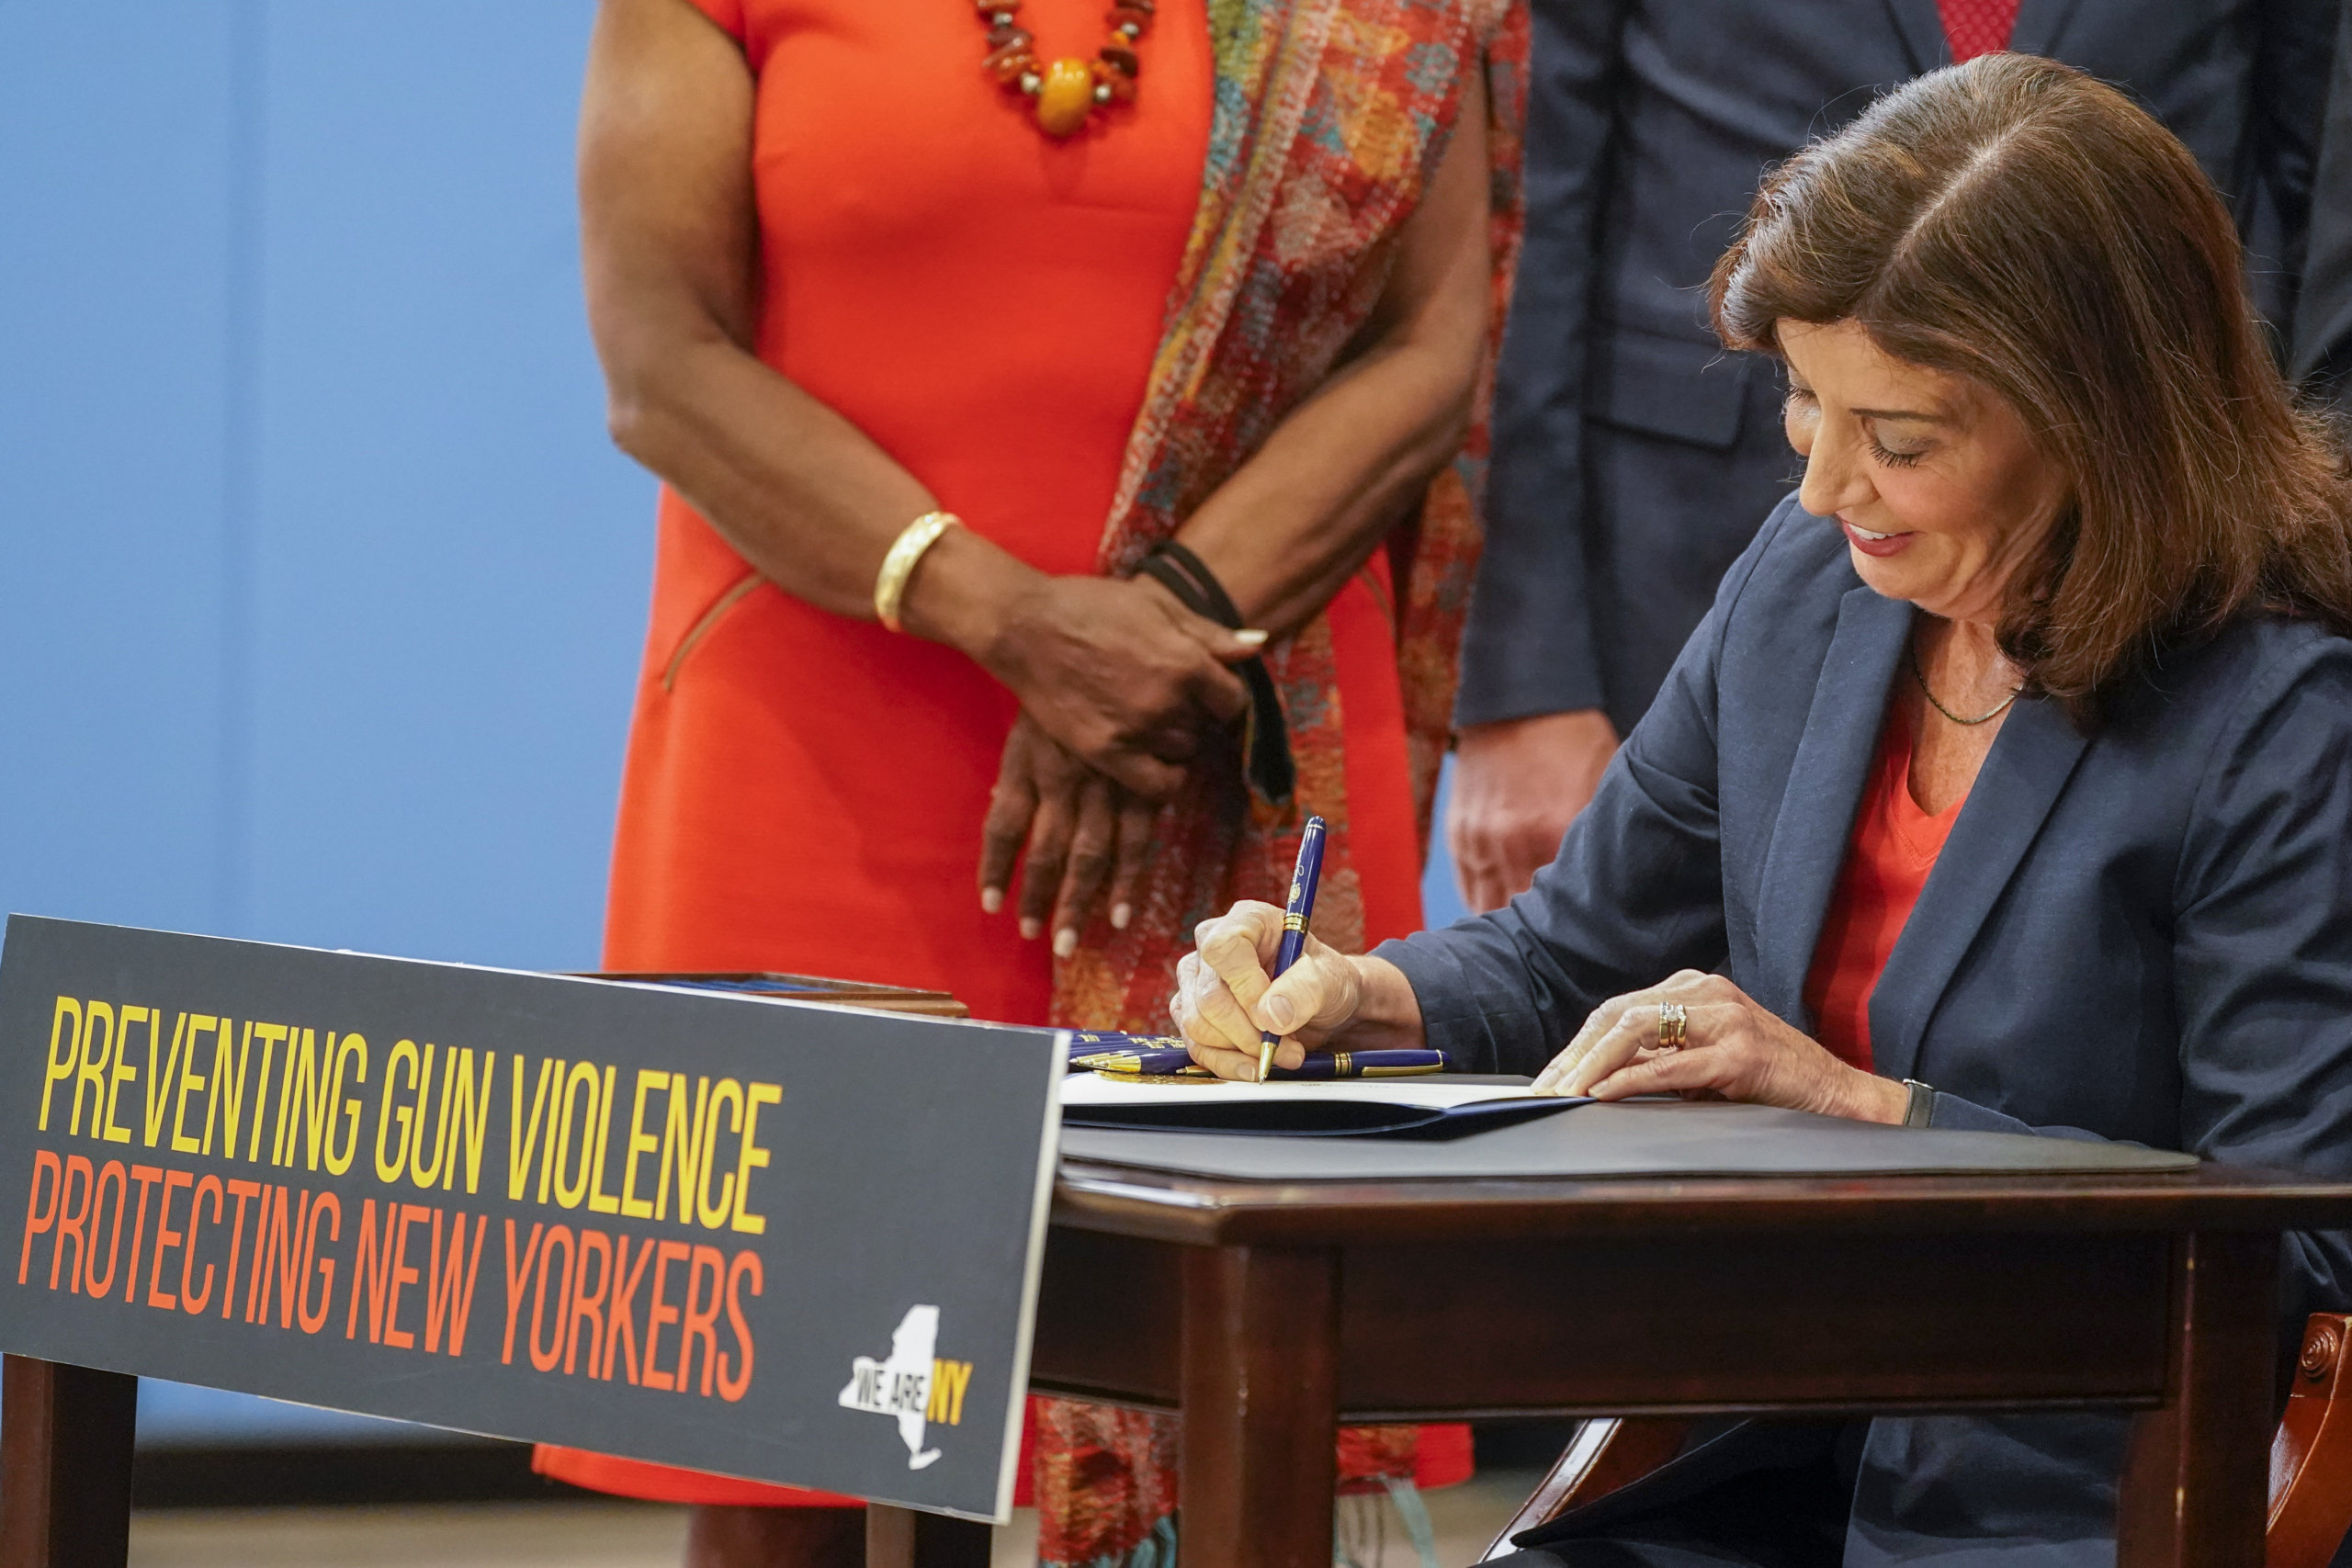 New York Governor Cathy Hochhol signs a package of laws to strengthen gun laws, Monday, June 6, 2022, in New York.  New York has strengthened gun ownership laws as part of a series of laws that Gov. Cathy Hochhol signed this week in hopes of reducing gun violence and gun-related deaths.  Hochhol, a Democrat, signed 10 gun bills on Monday.